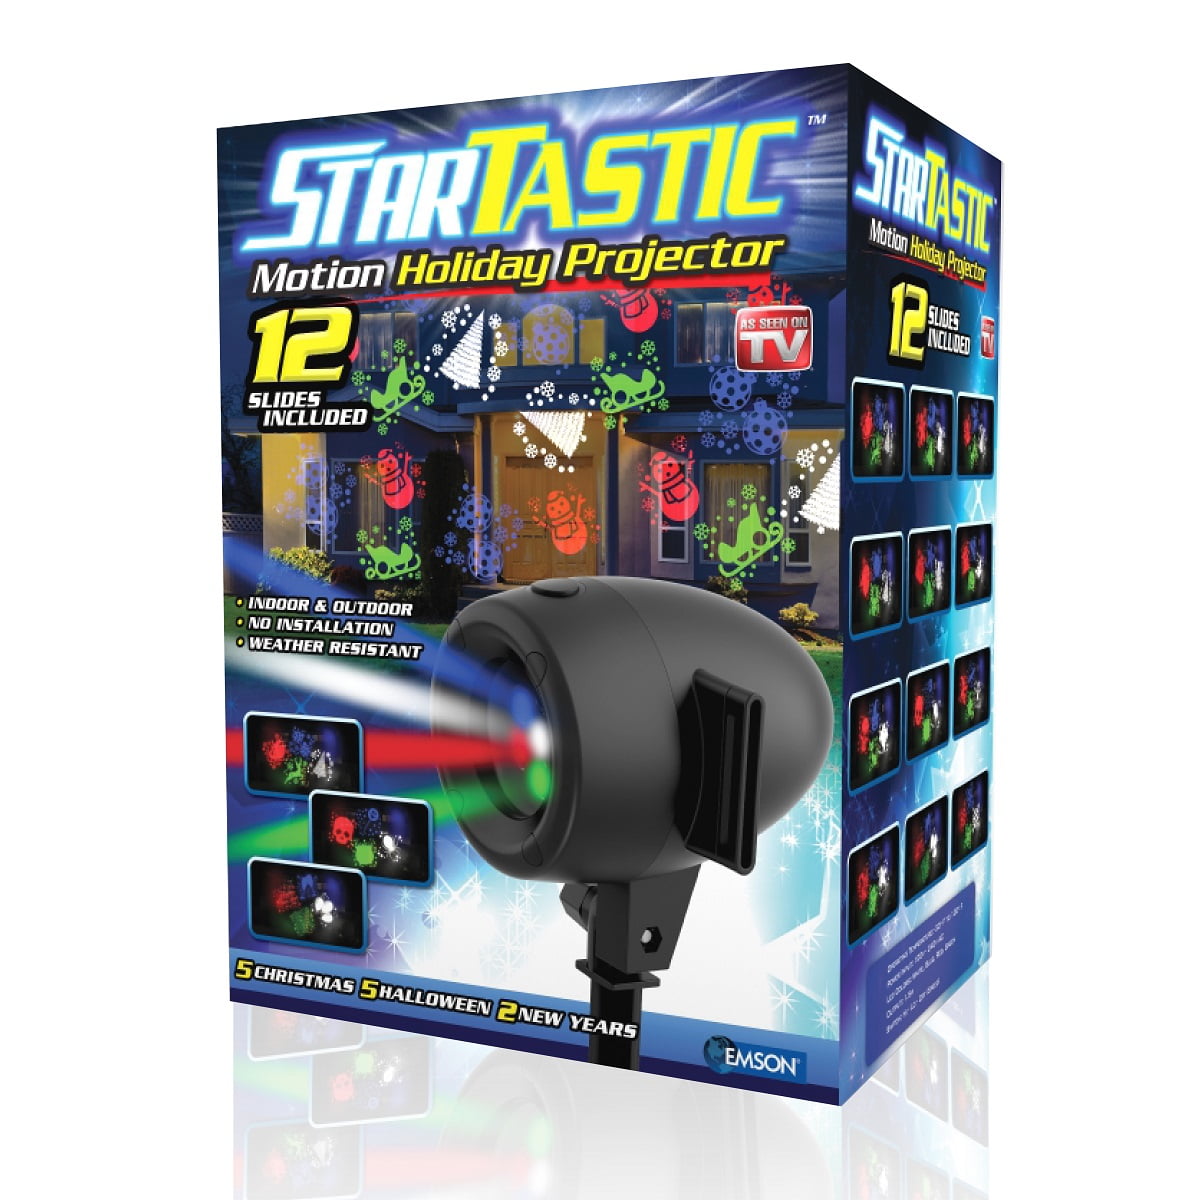 Startastic Holiday Light Show The As Seen on TV Laser Light Projector New 